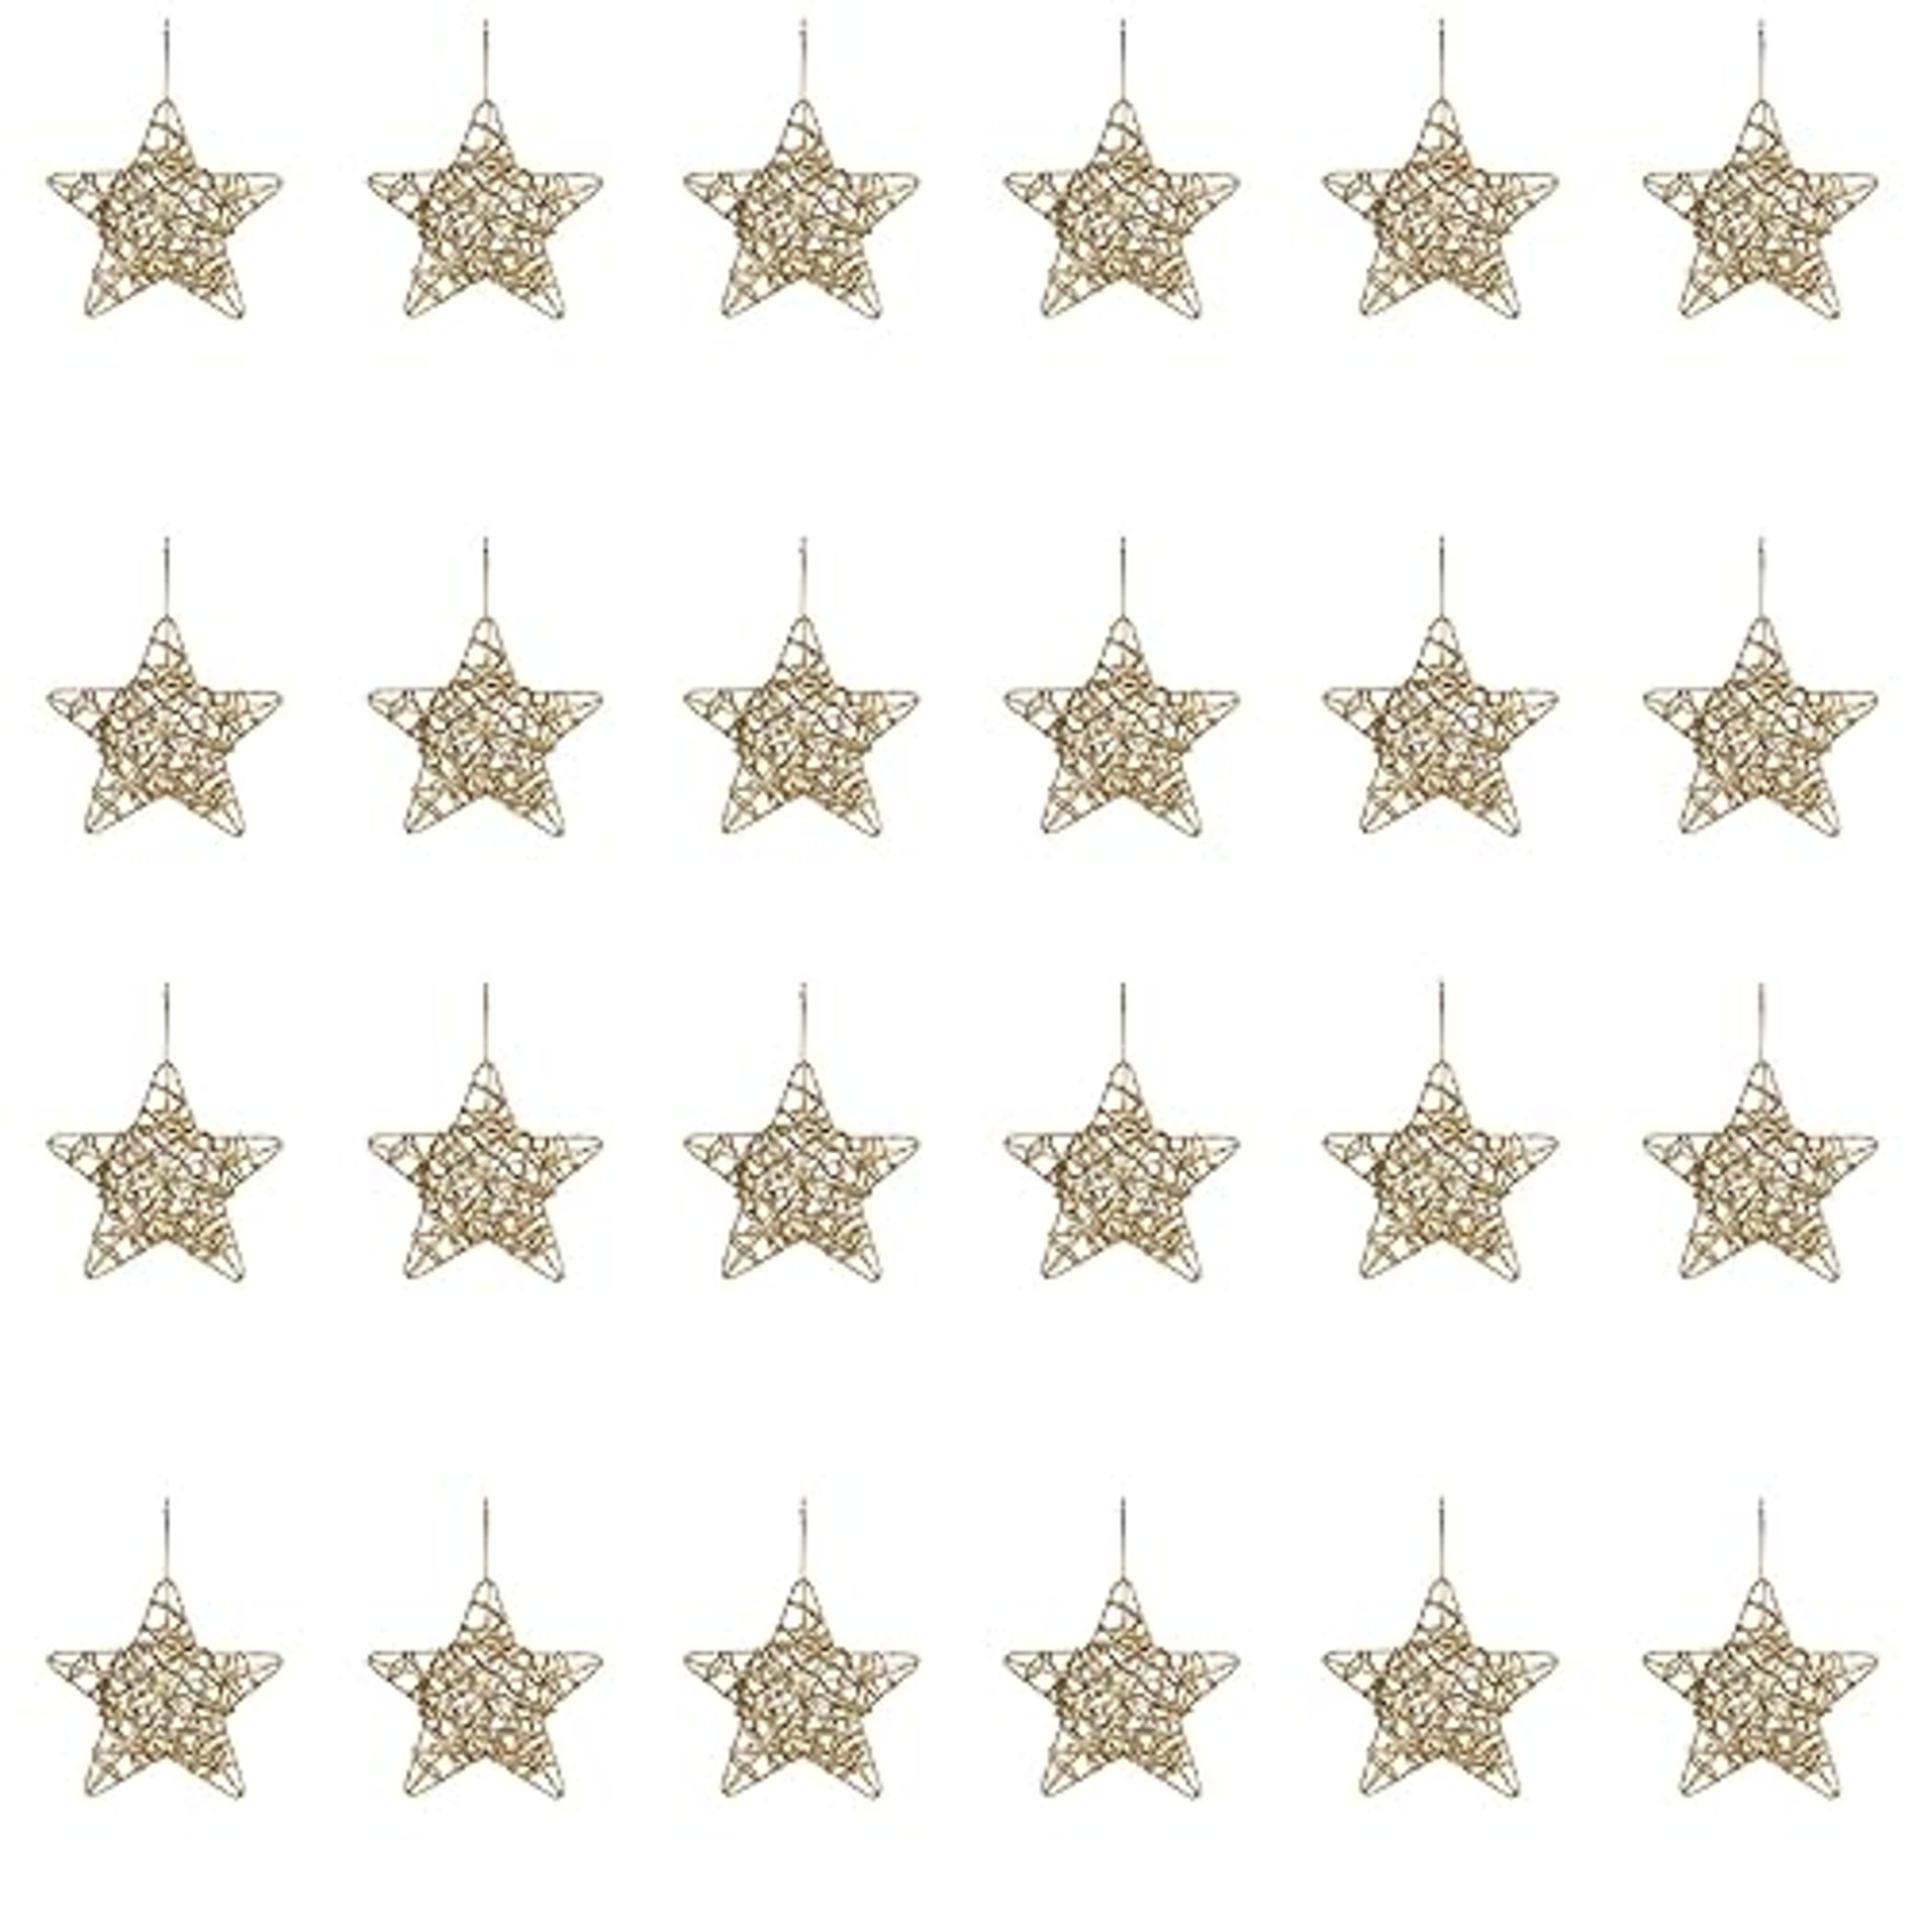 Belle Vous 24 Pack Christmas Tree Decoration - 10 x 10cm Gold Star Baubles Christmas Tree Hanging O